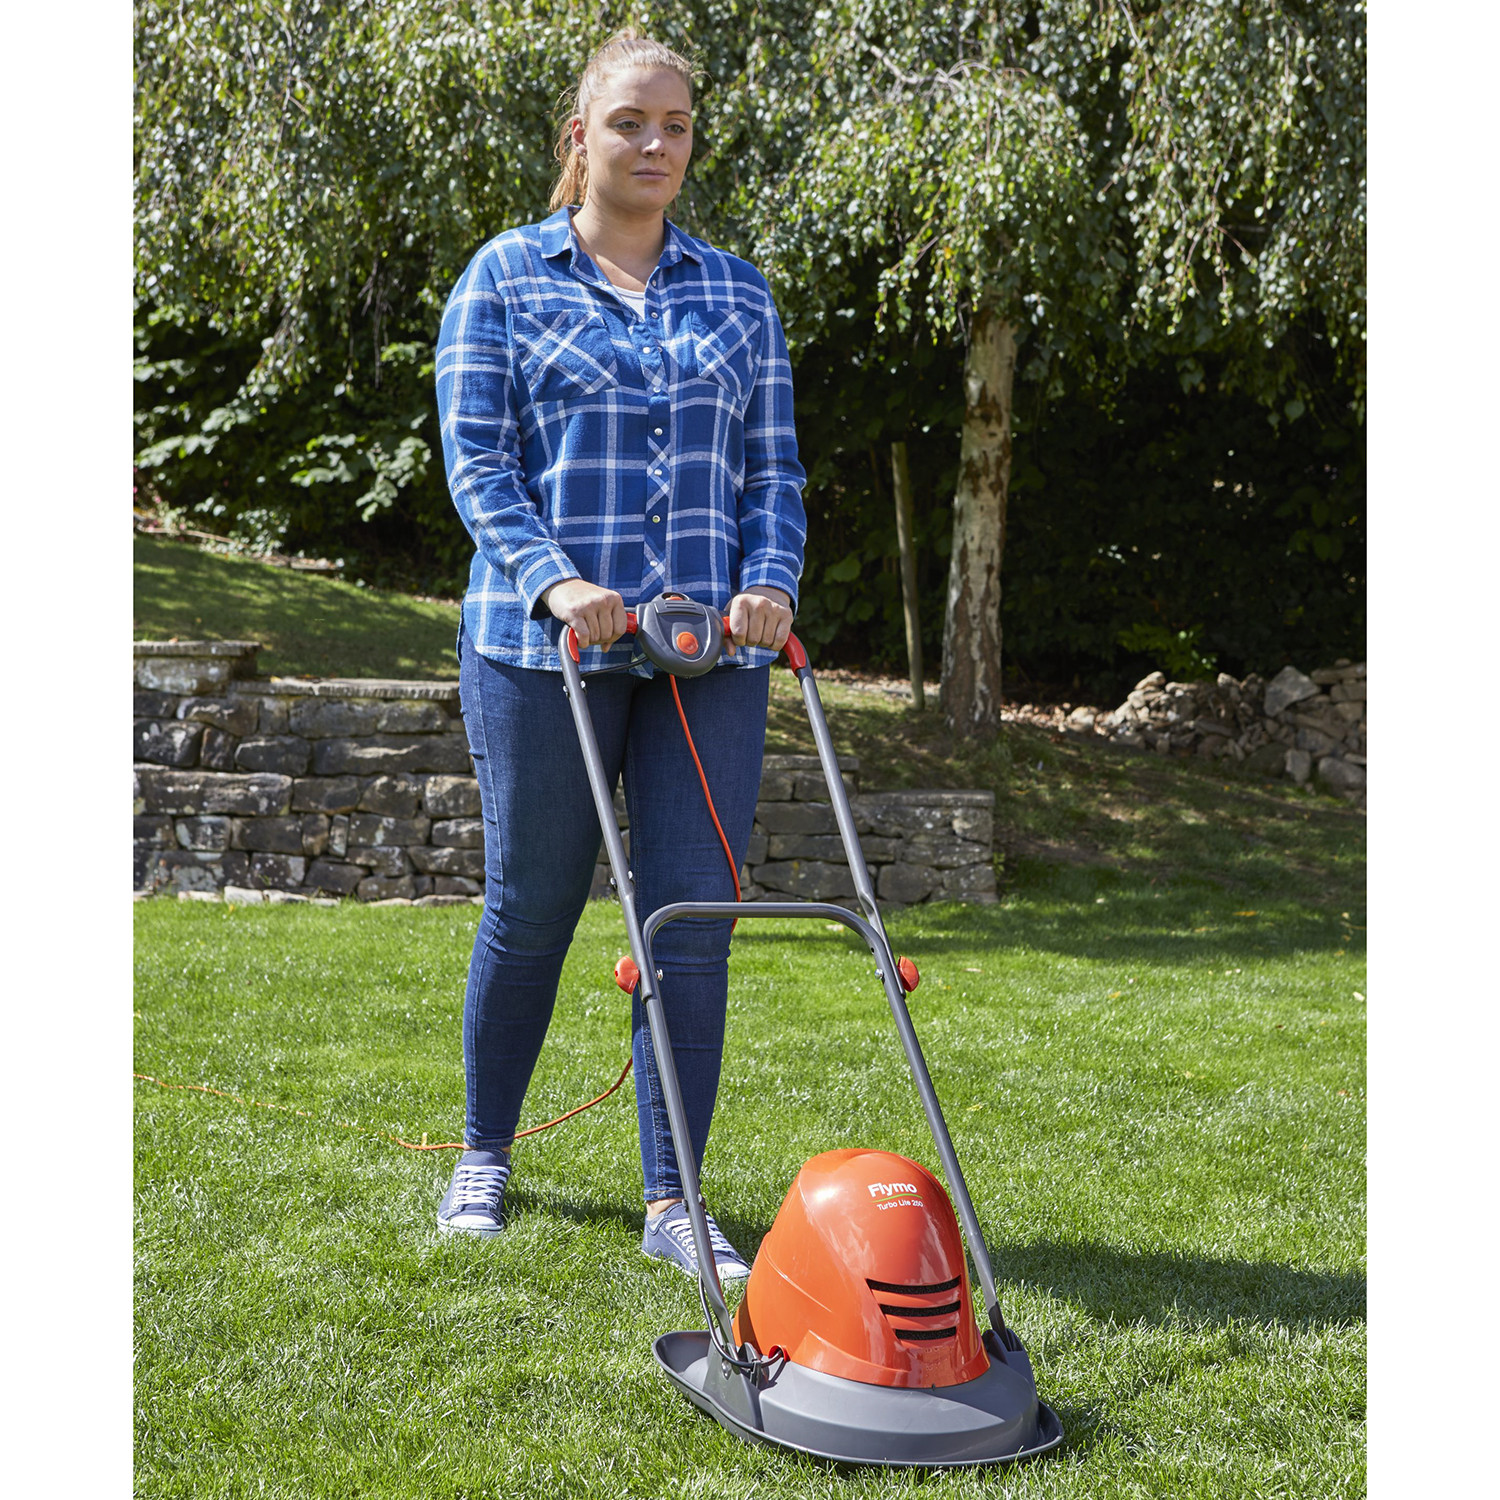 Flymo Hovervac 250 1400W Hand Propelled 25cm Hover Electric Lawn Mower Image 3